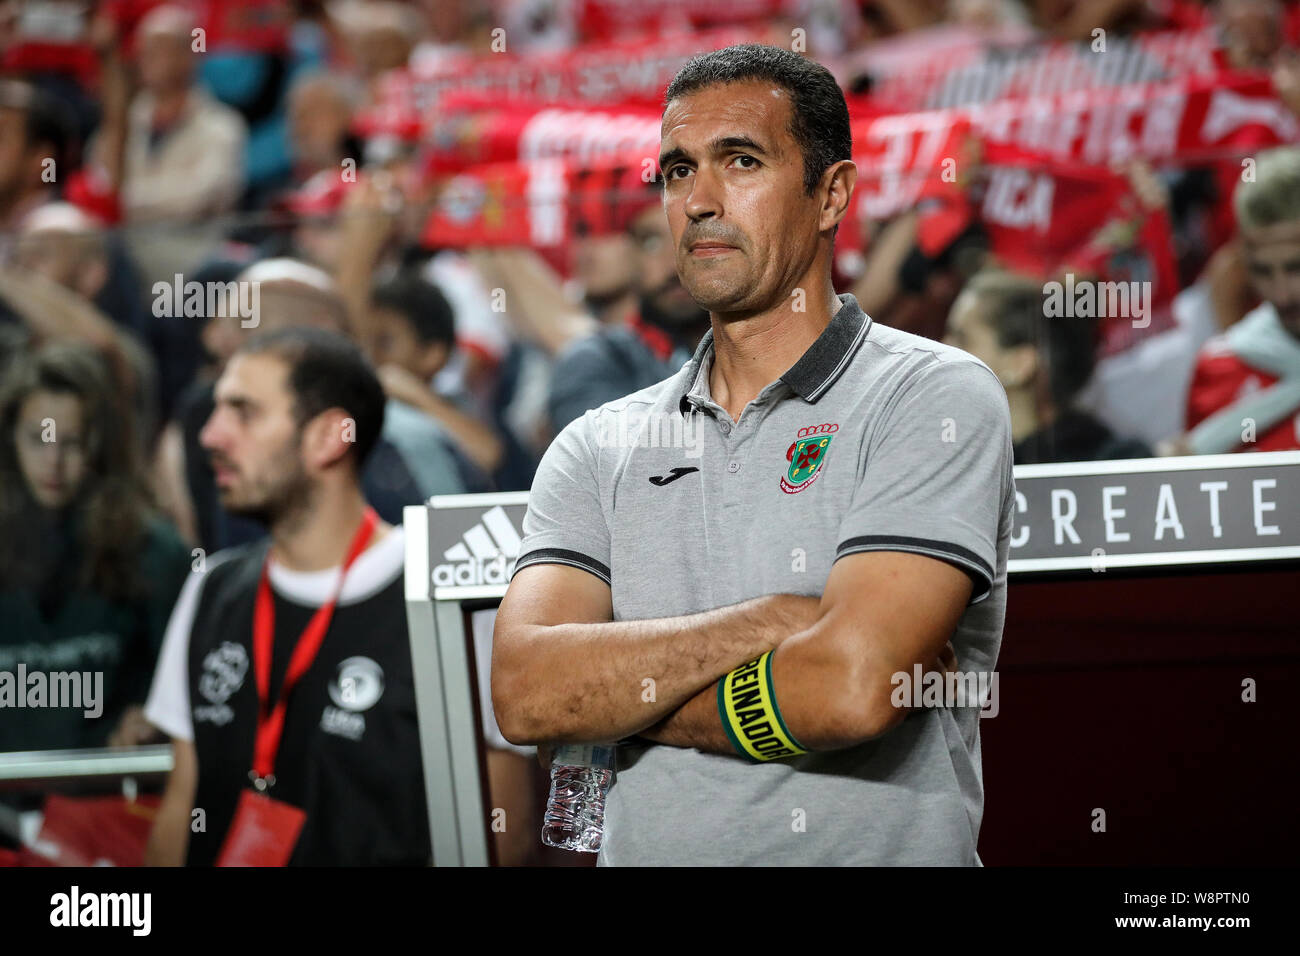 Lisbon, Portugal. 10th Aug, 2019. Coach Filipe Rocha of FC Paços de Ferreira in action during the League NOS 2019/20 footballl match between SL Benfica vs FC Paços de Ferreira.(Final score: SL Benfica 5 - 0 FC Paços de Ferreira) Credit: SOPA Images Limited/Alamy Live News Stock Photo